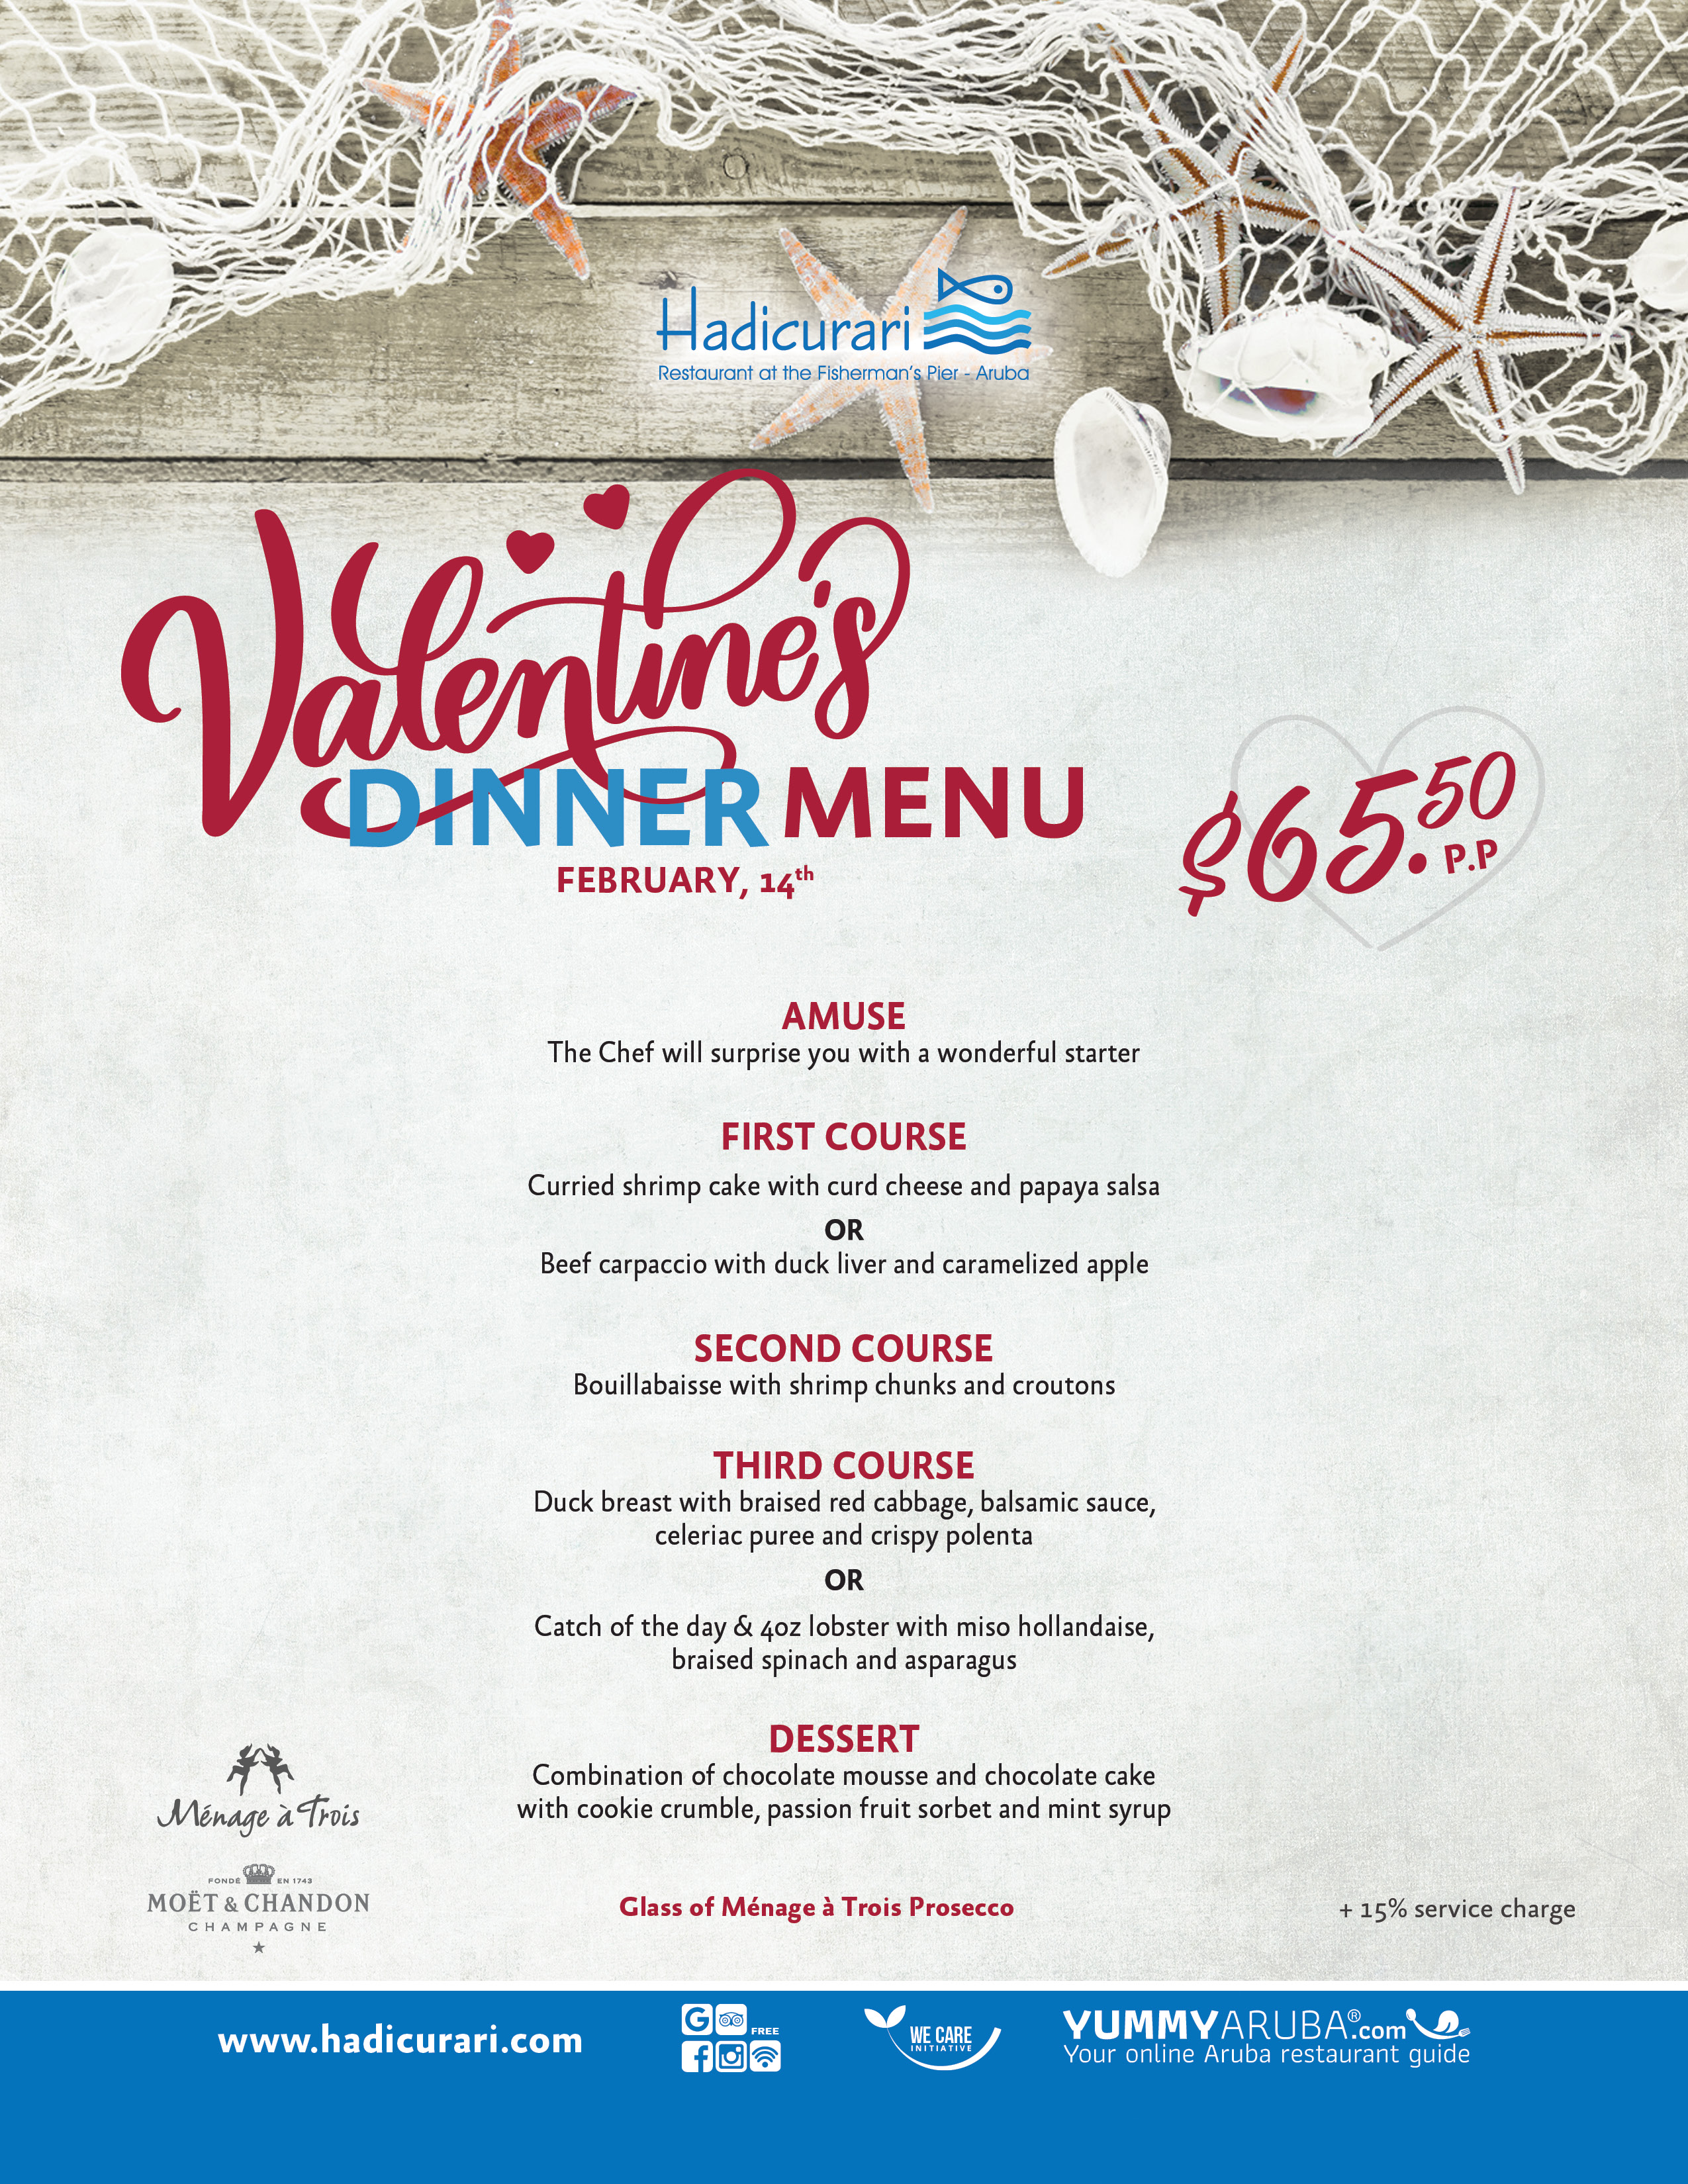 This stunning ocean view getaway is a fantastic 4-course choice Valentine’s Day dinner menu for $65.50 on February 14th